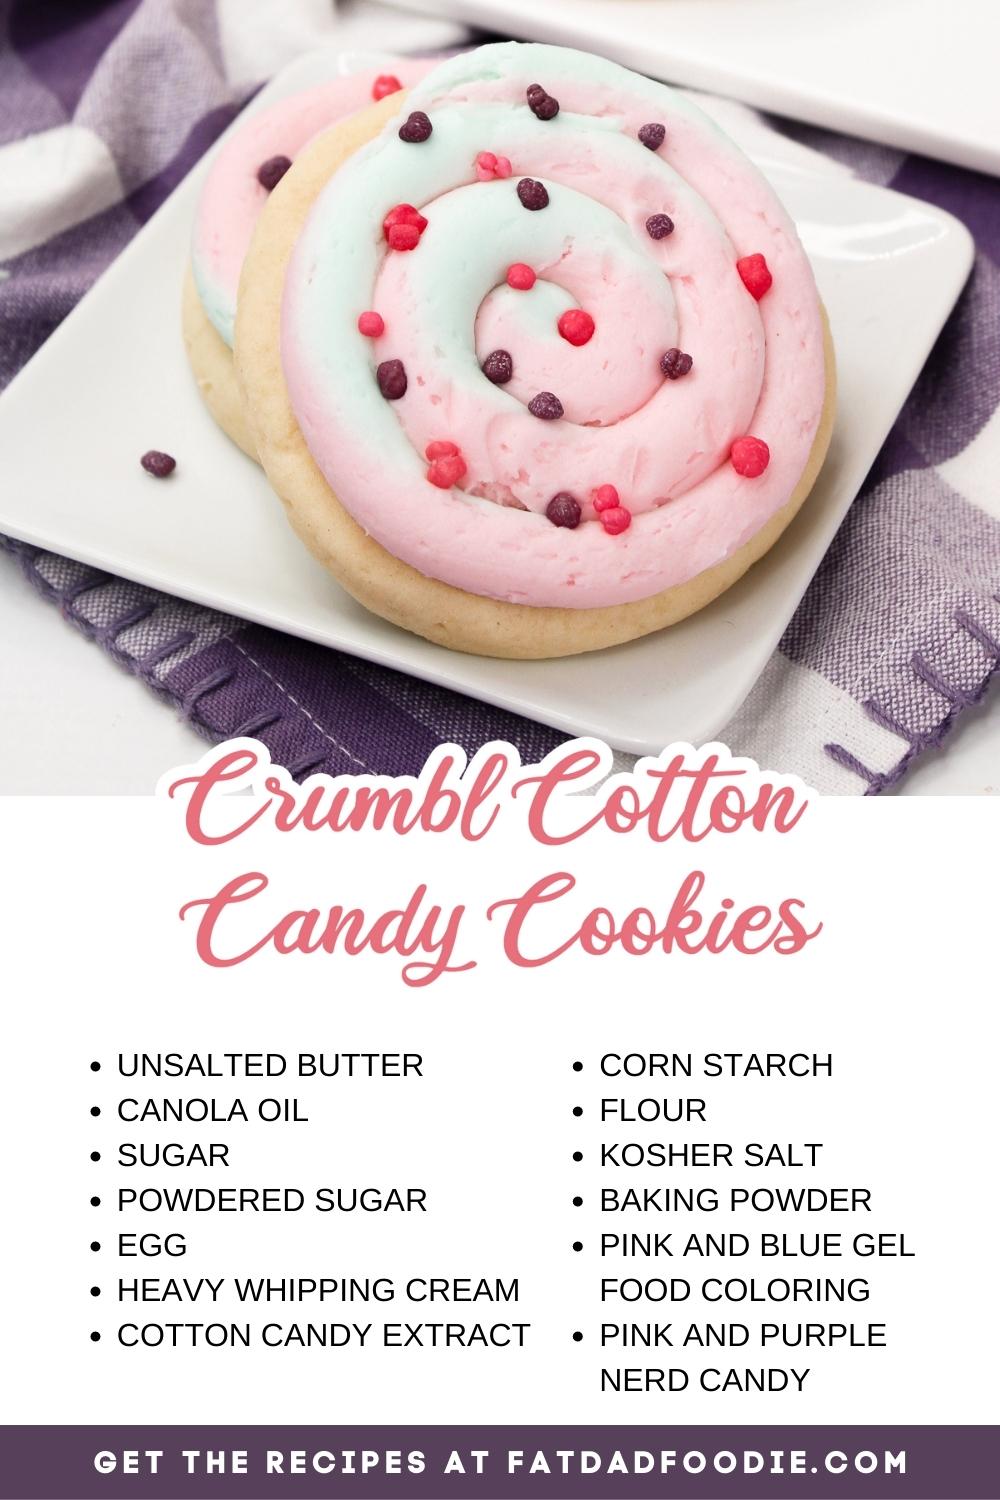 crumbl cotton candy cookies ingredient list